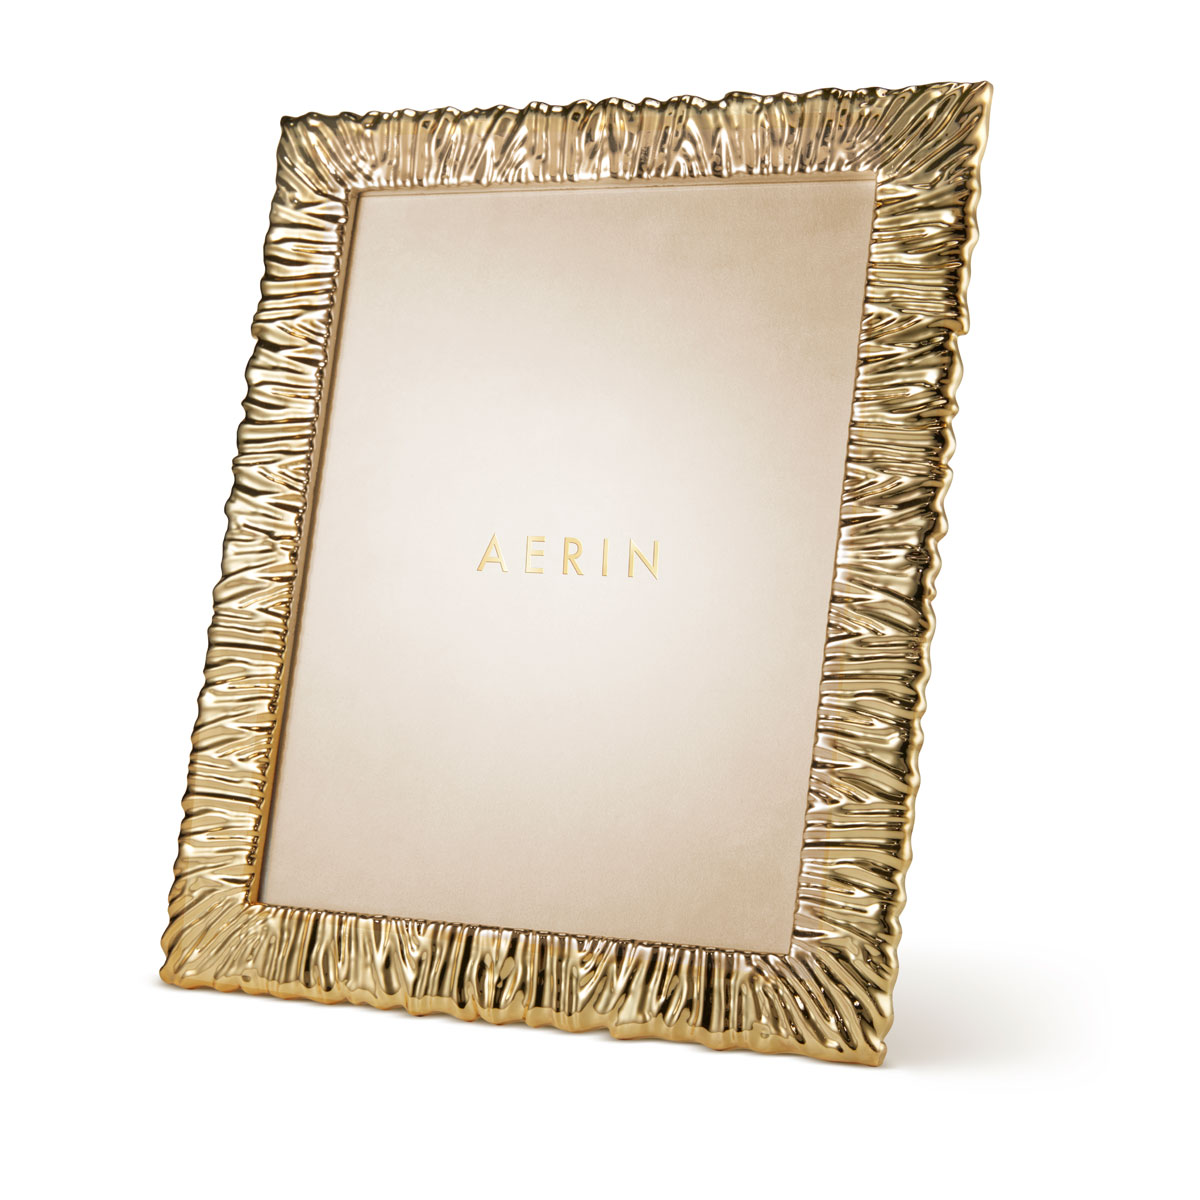 Aerin Ambroise 8x10" Gold Picture Frame